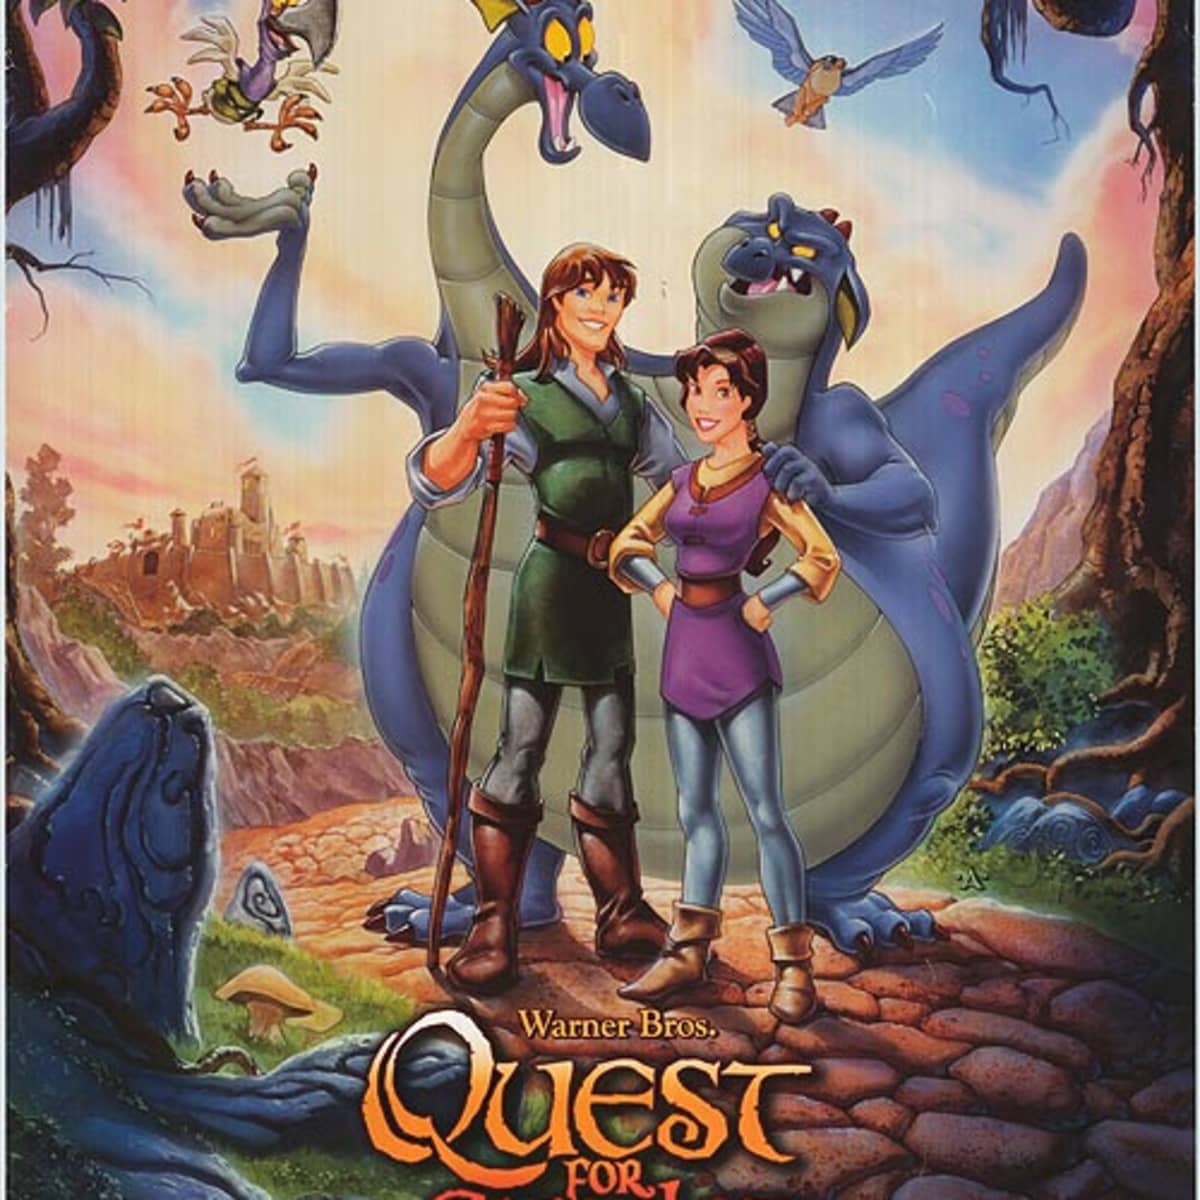 Film Review: Quest for Camelot - HubPages